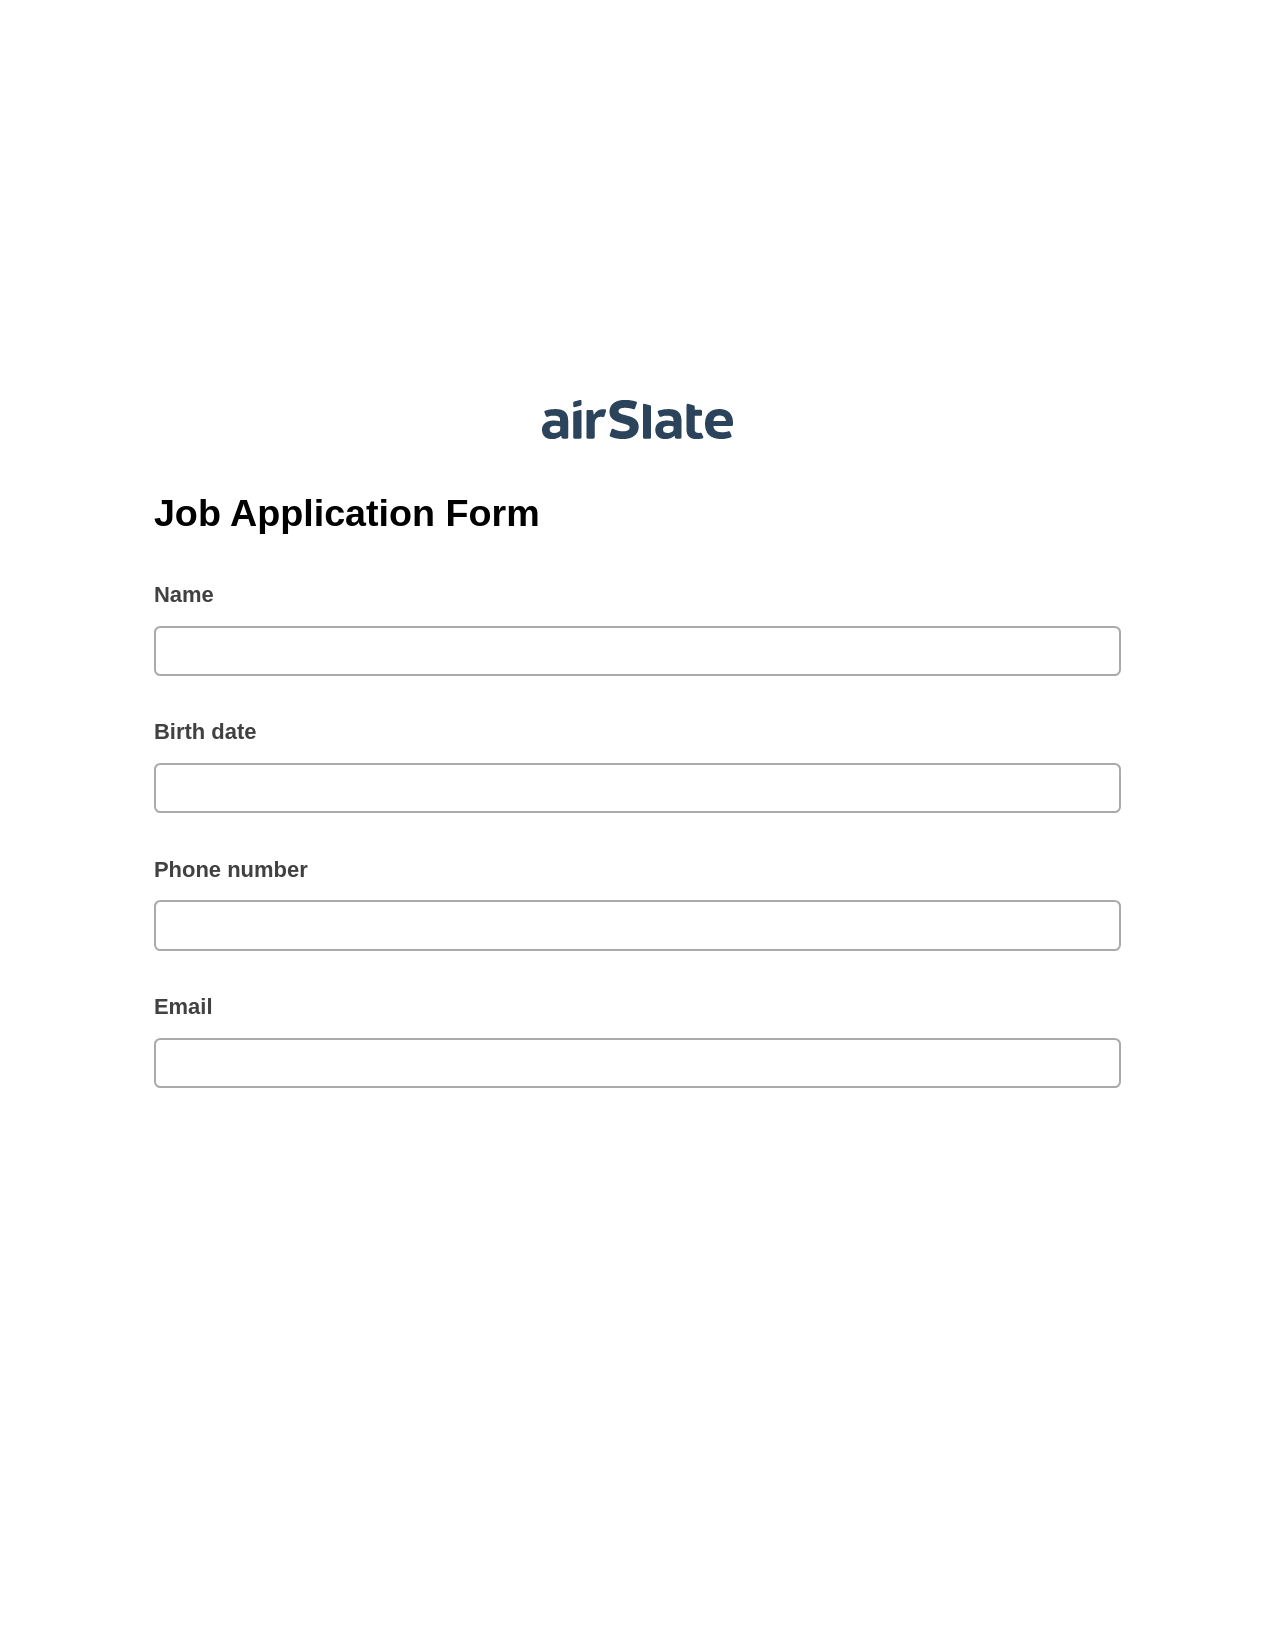 Multirole Job Application Form Pre-fill from Excel Spreadsheet Bot, Mailchimp send Campaign bot, OneDrive Bot